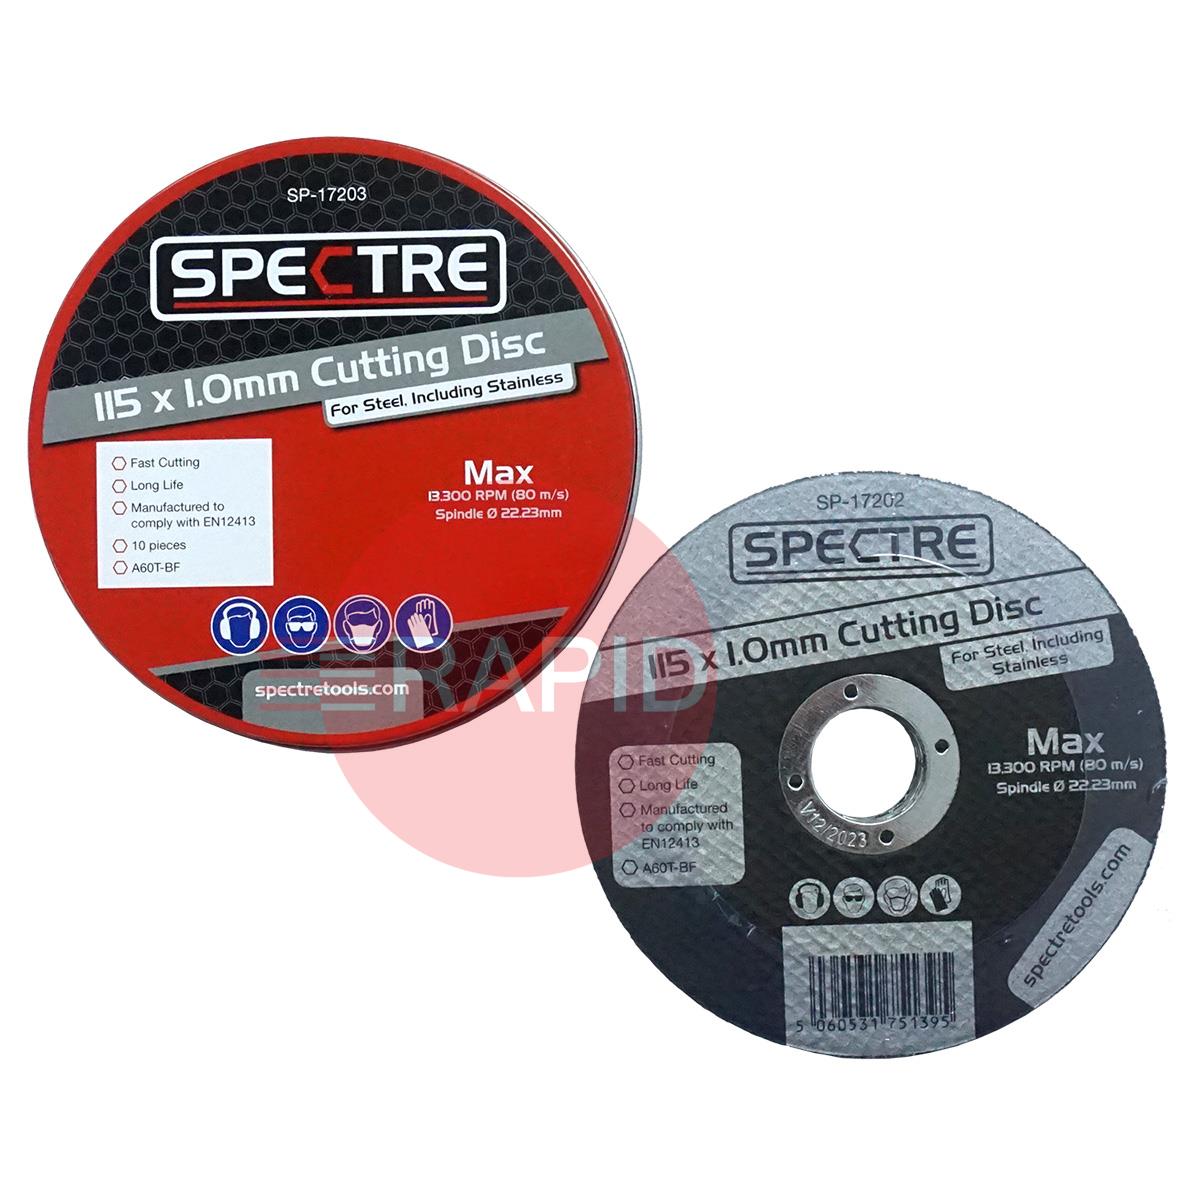 SP-17203  Spectre115mm (4.5) Slitting Cutting Disc 1mm Thick. Grade A60T-BF for Steel & Stainless Steel. Tin of 10 Pieces.